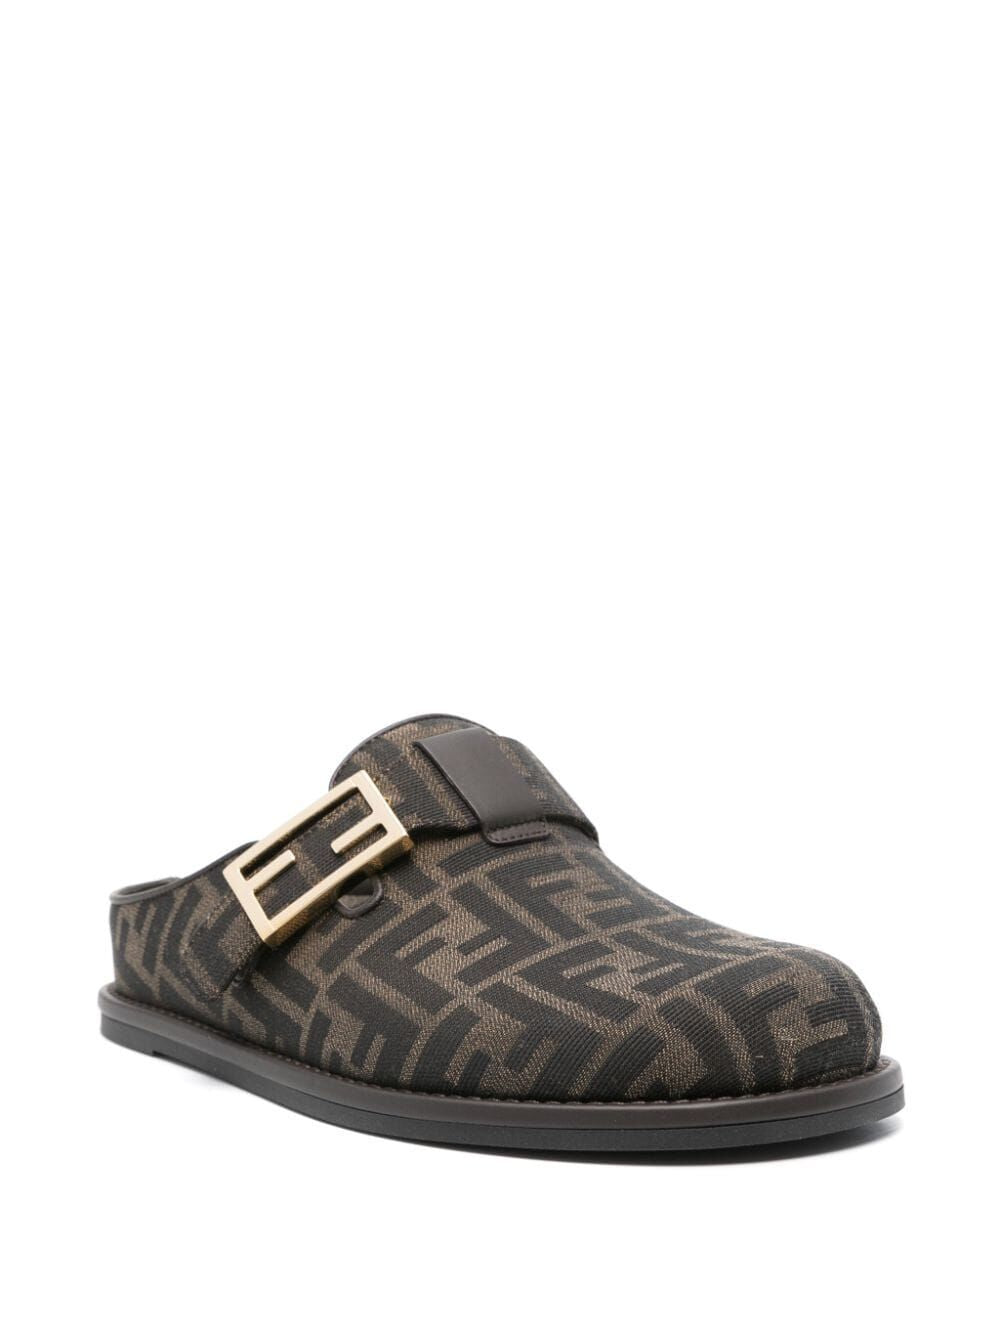 FENDI Luxurious Brown Sandals for Women: The Ultimate SS24 Must-Have